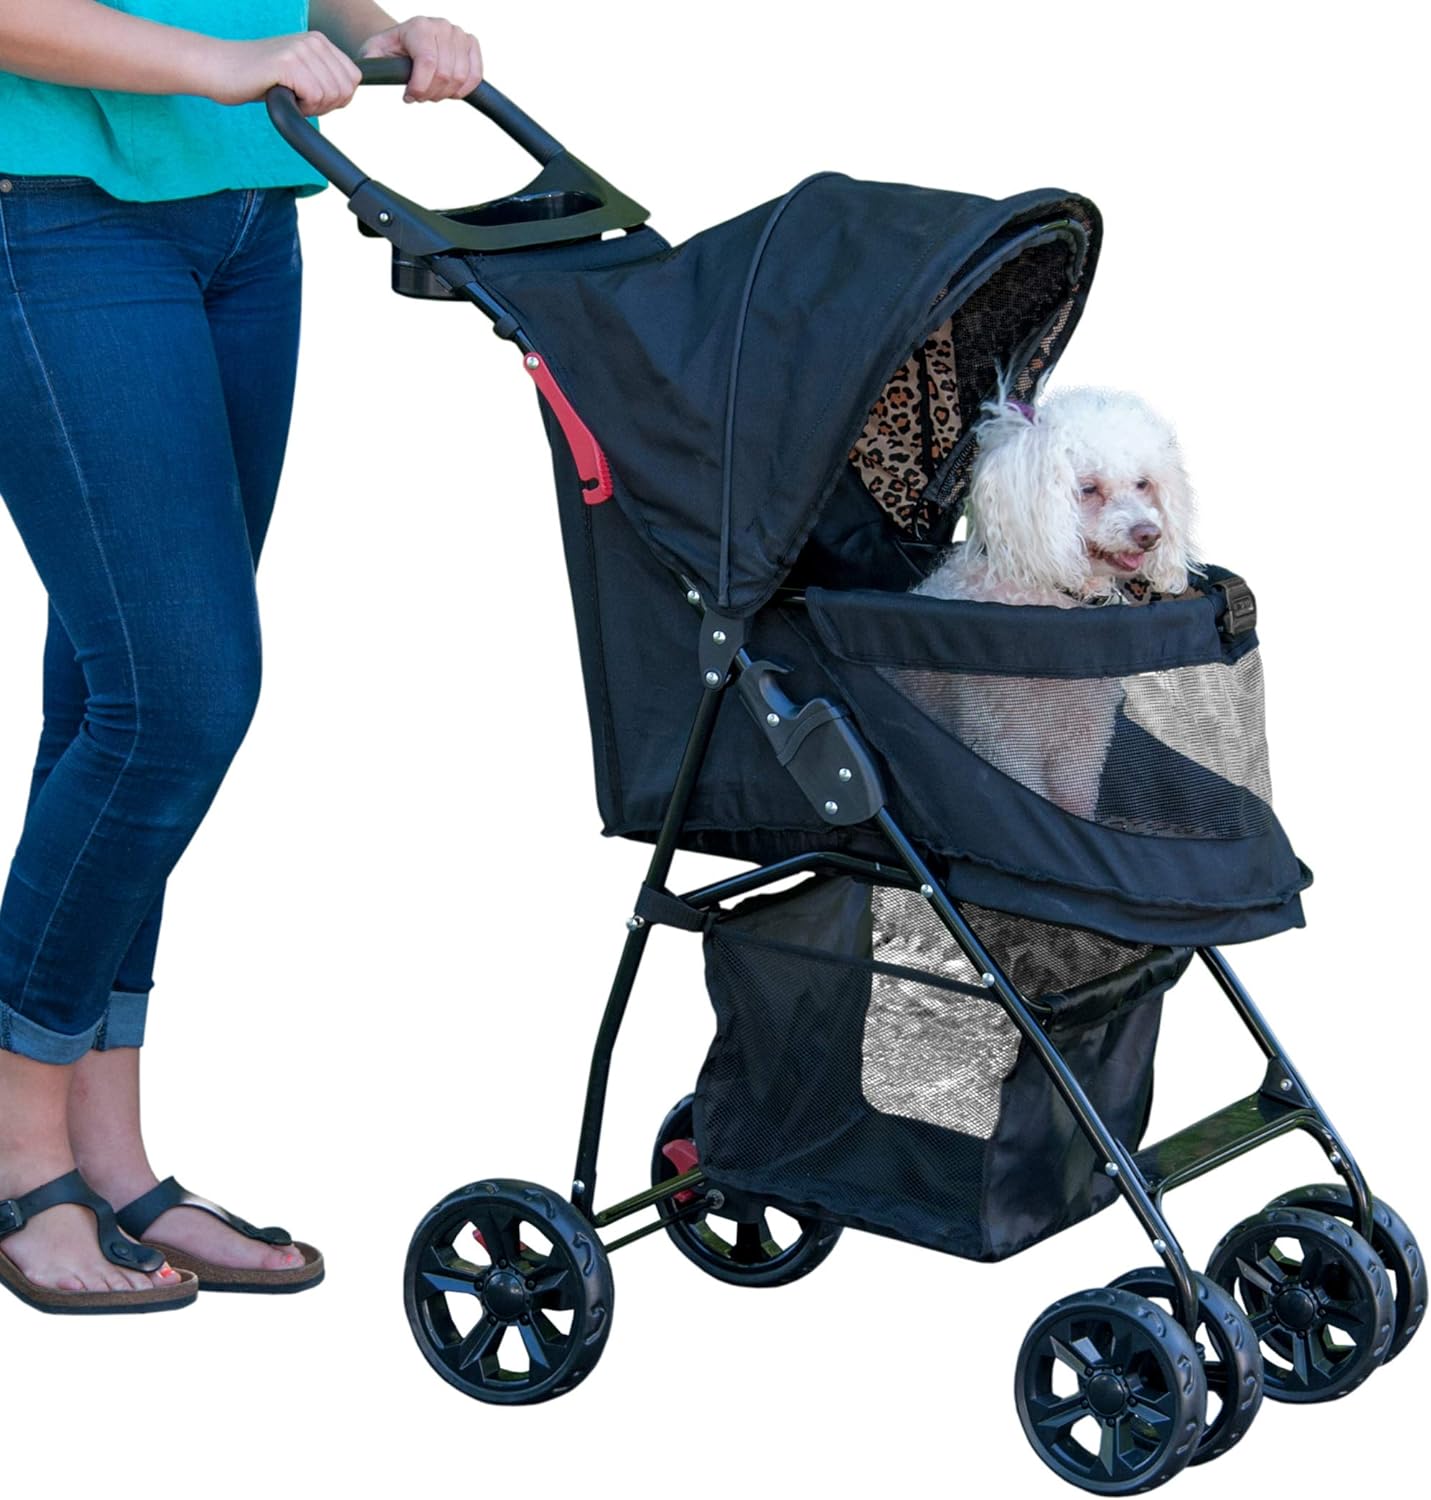 Pet Gear No-Zip Happy Trails Lite Pet Stroller for Cats\/Dogs, Zipperless Entry, Easy Fold with Removable Liner, Safety Tether, Storage Basket + Cup Holder, 4 Colors